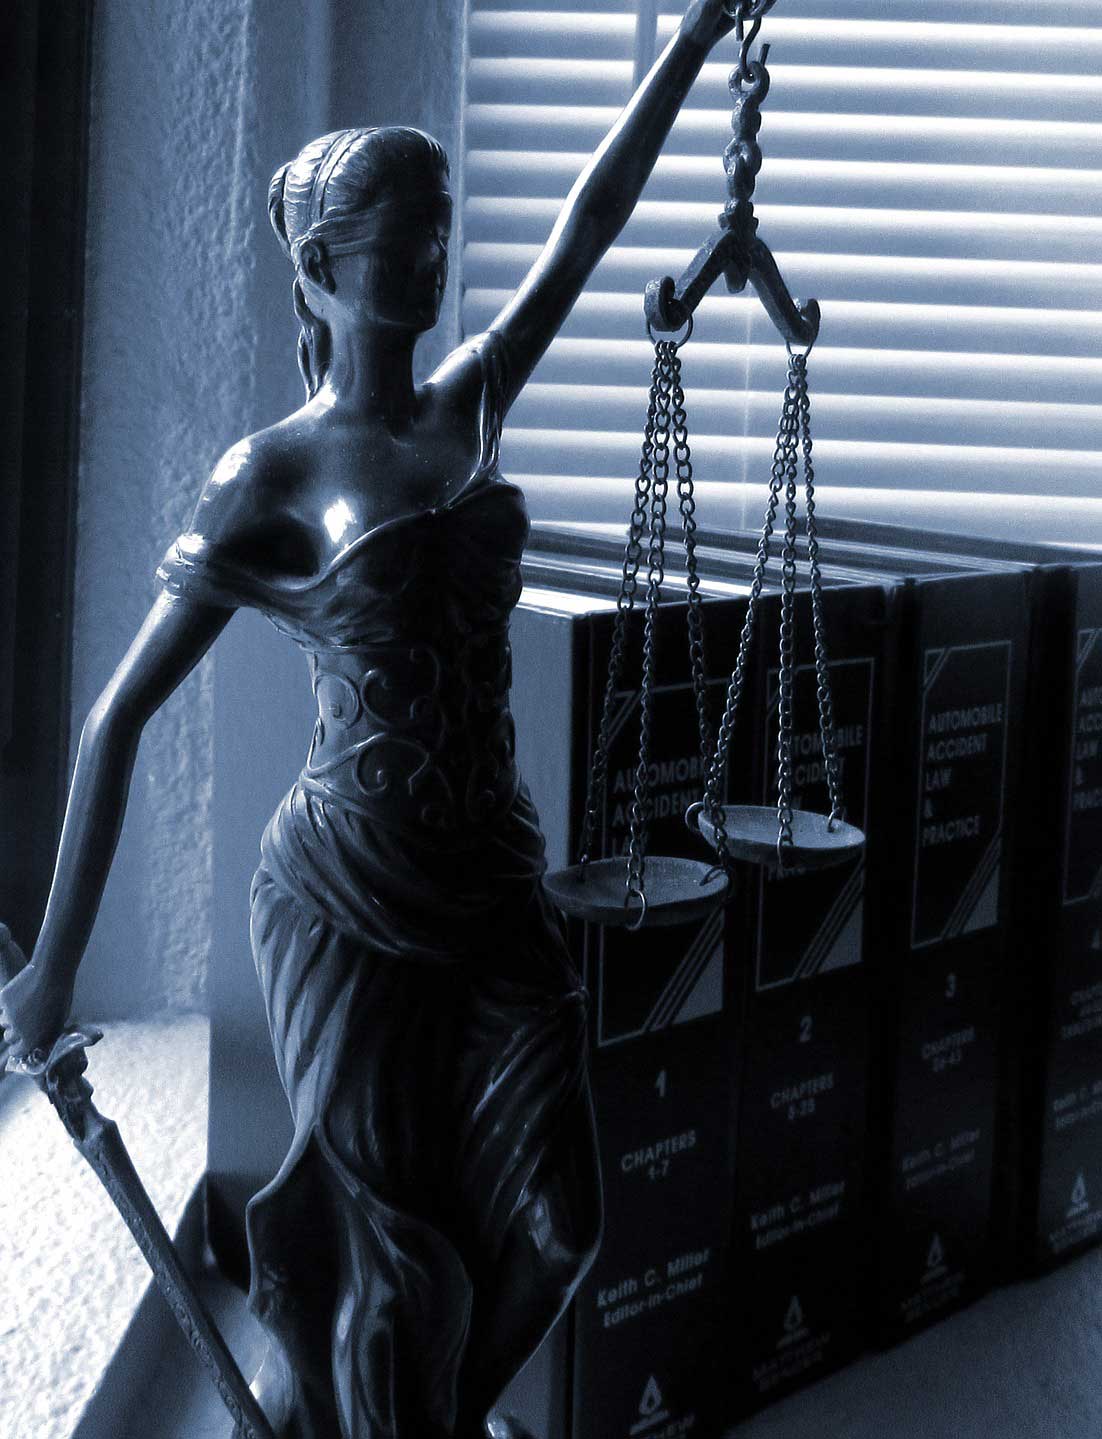 Litigation sculpture with the scales of justice representing the fair and balanced legal system in Alberta